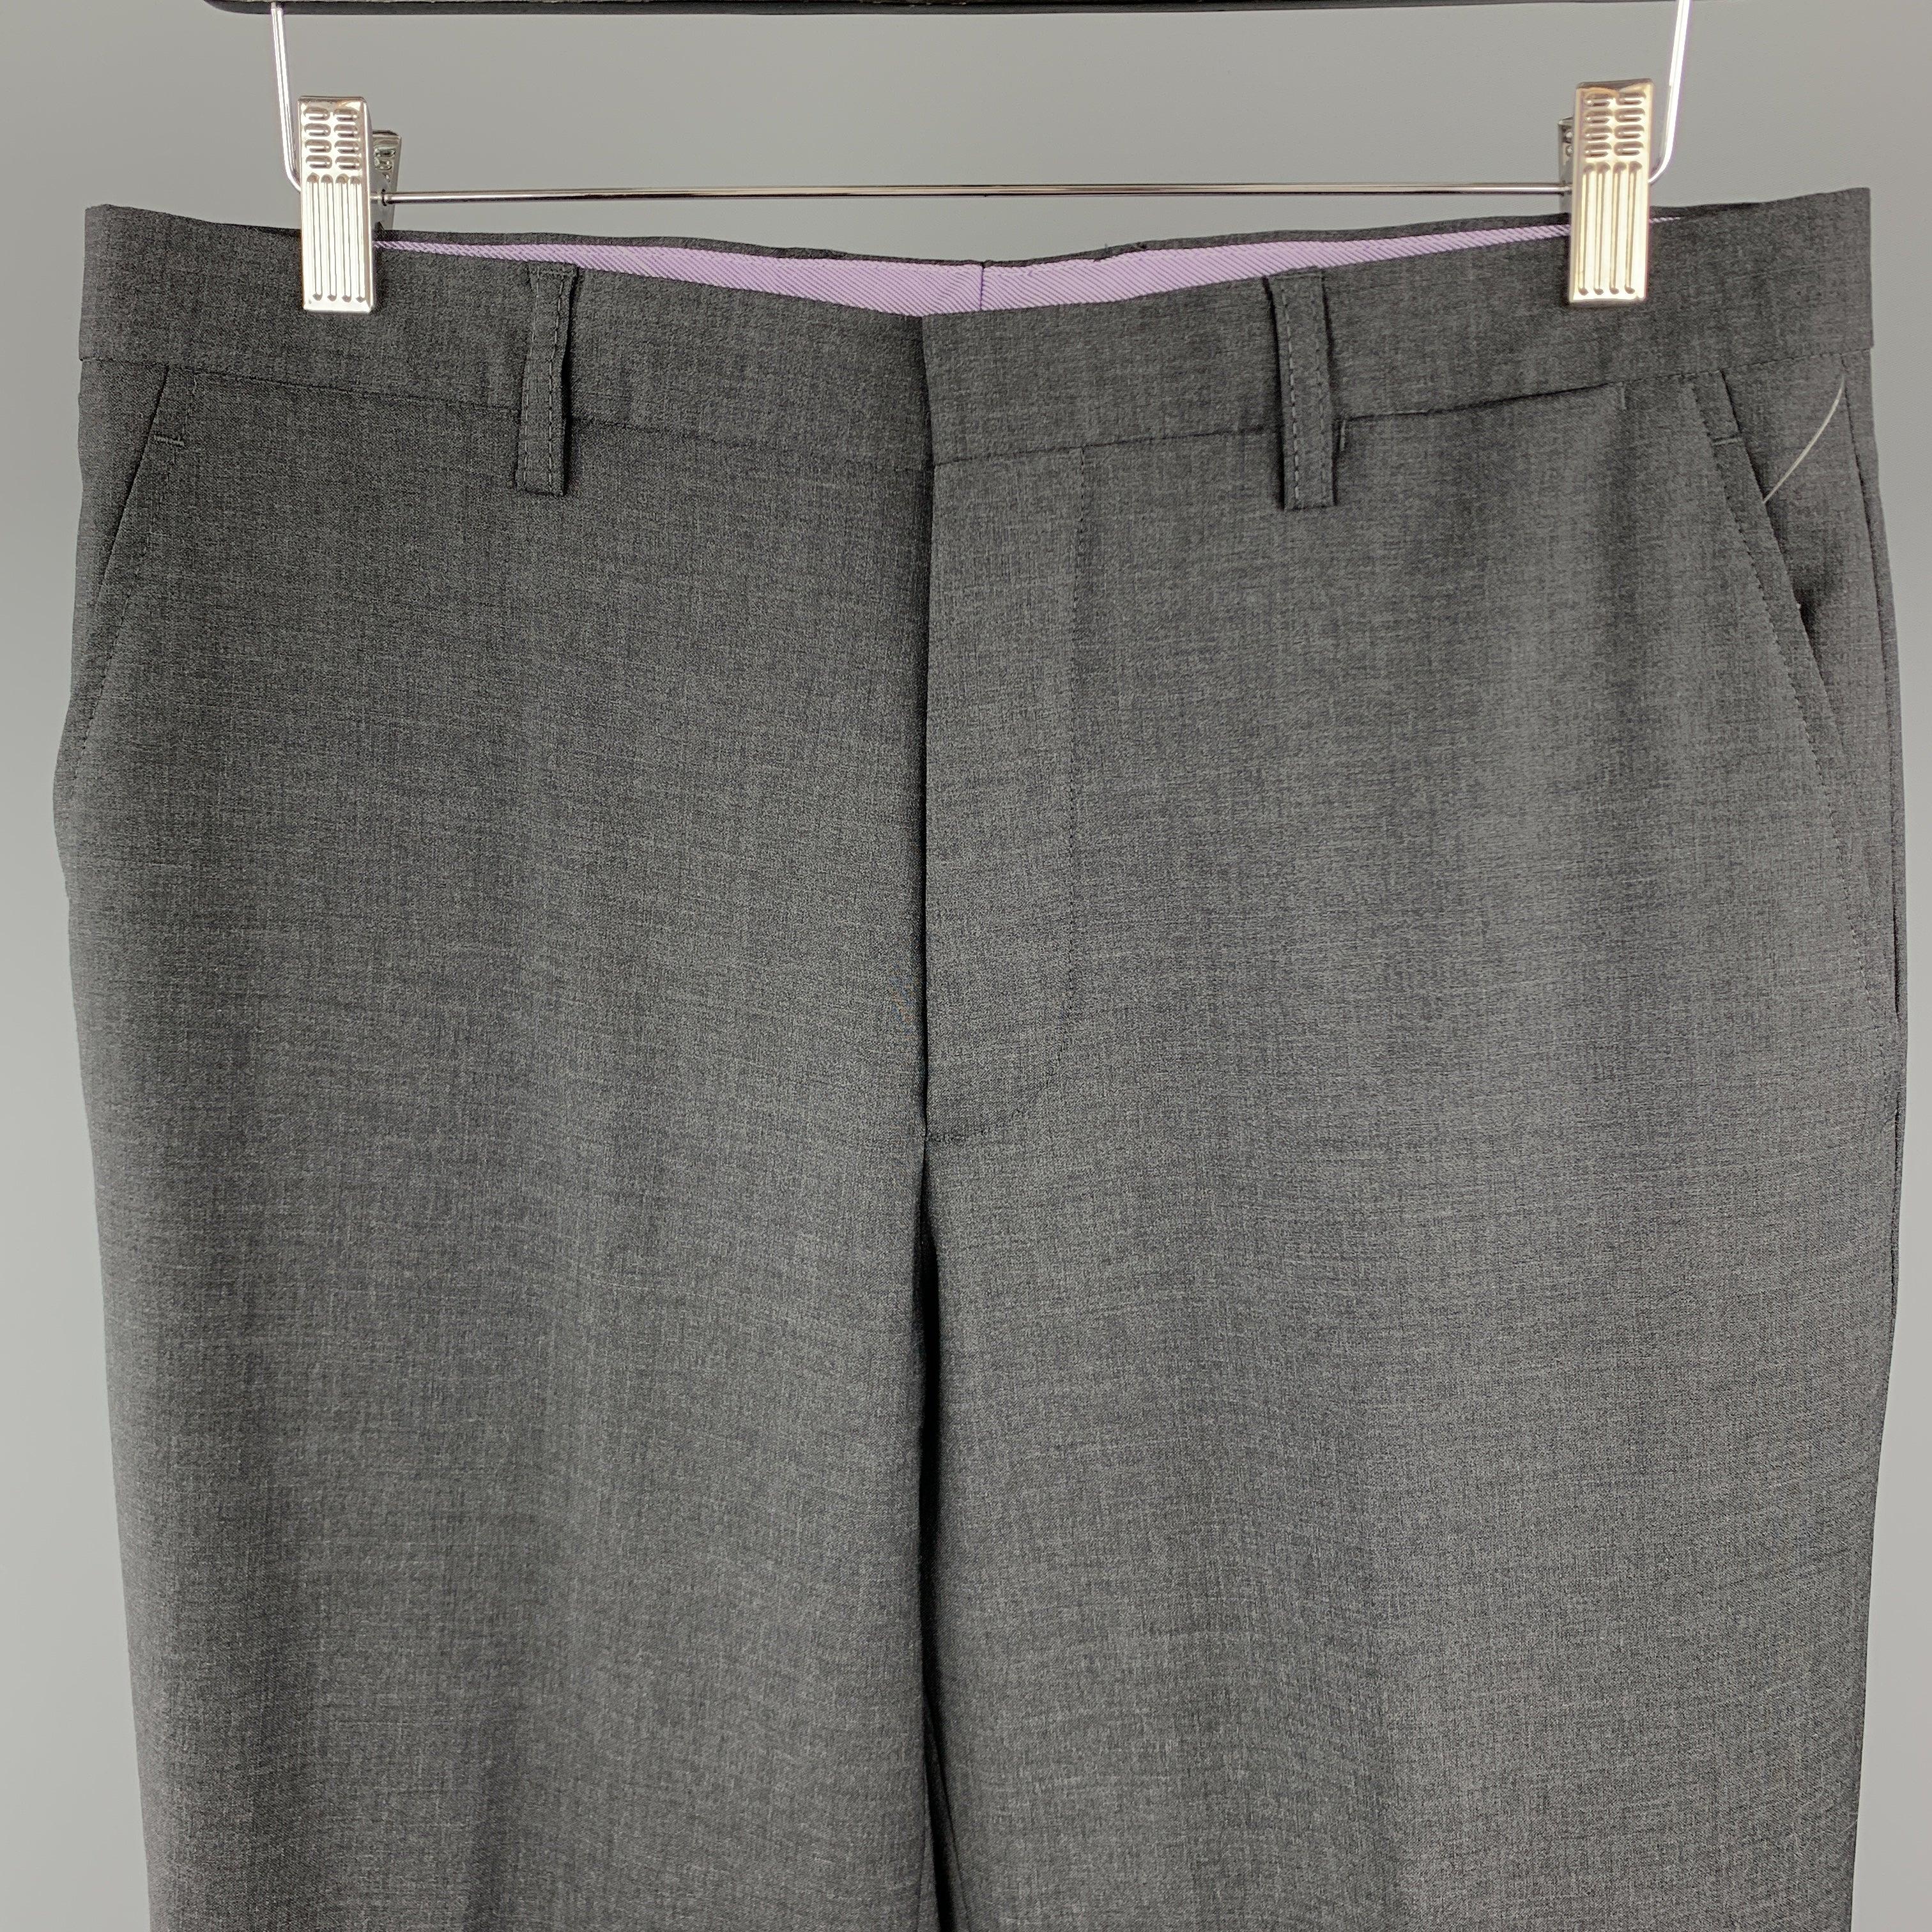 ETRO
dress pants comes in a solid gray lana wool material, featuring a flat front style, zip fly, and seam and slit pockets. Made in Italy.Excellent Pre-Owned Condition. 

Marked:   IT 50 

Measurements: 
  Waist: 34 inches 
Rise: 10.5 inches